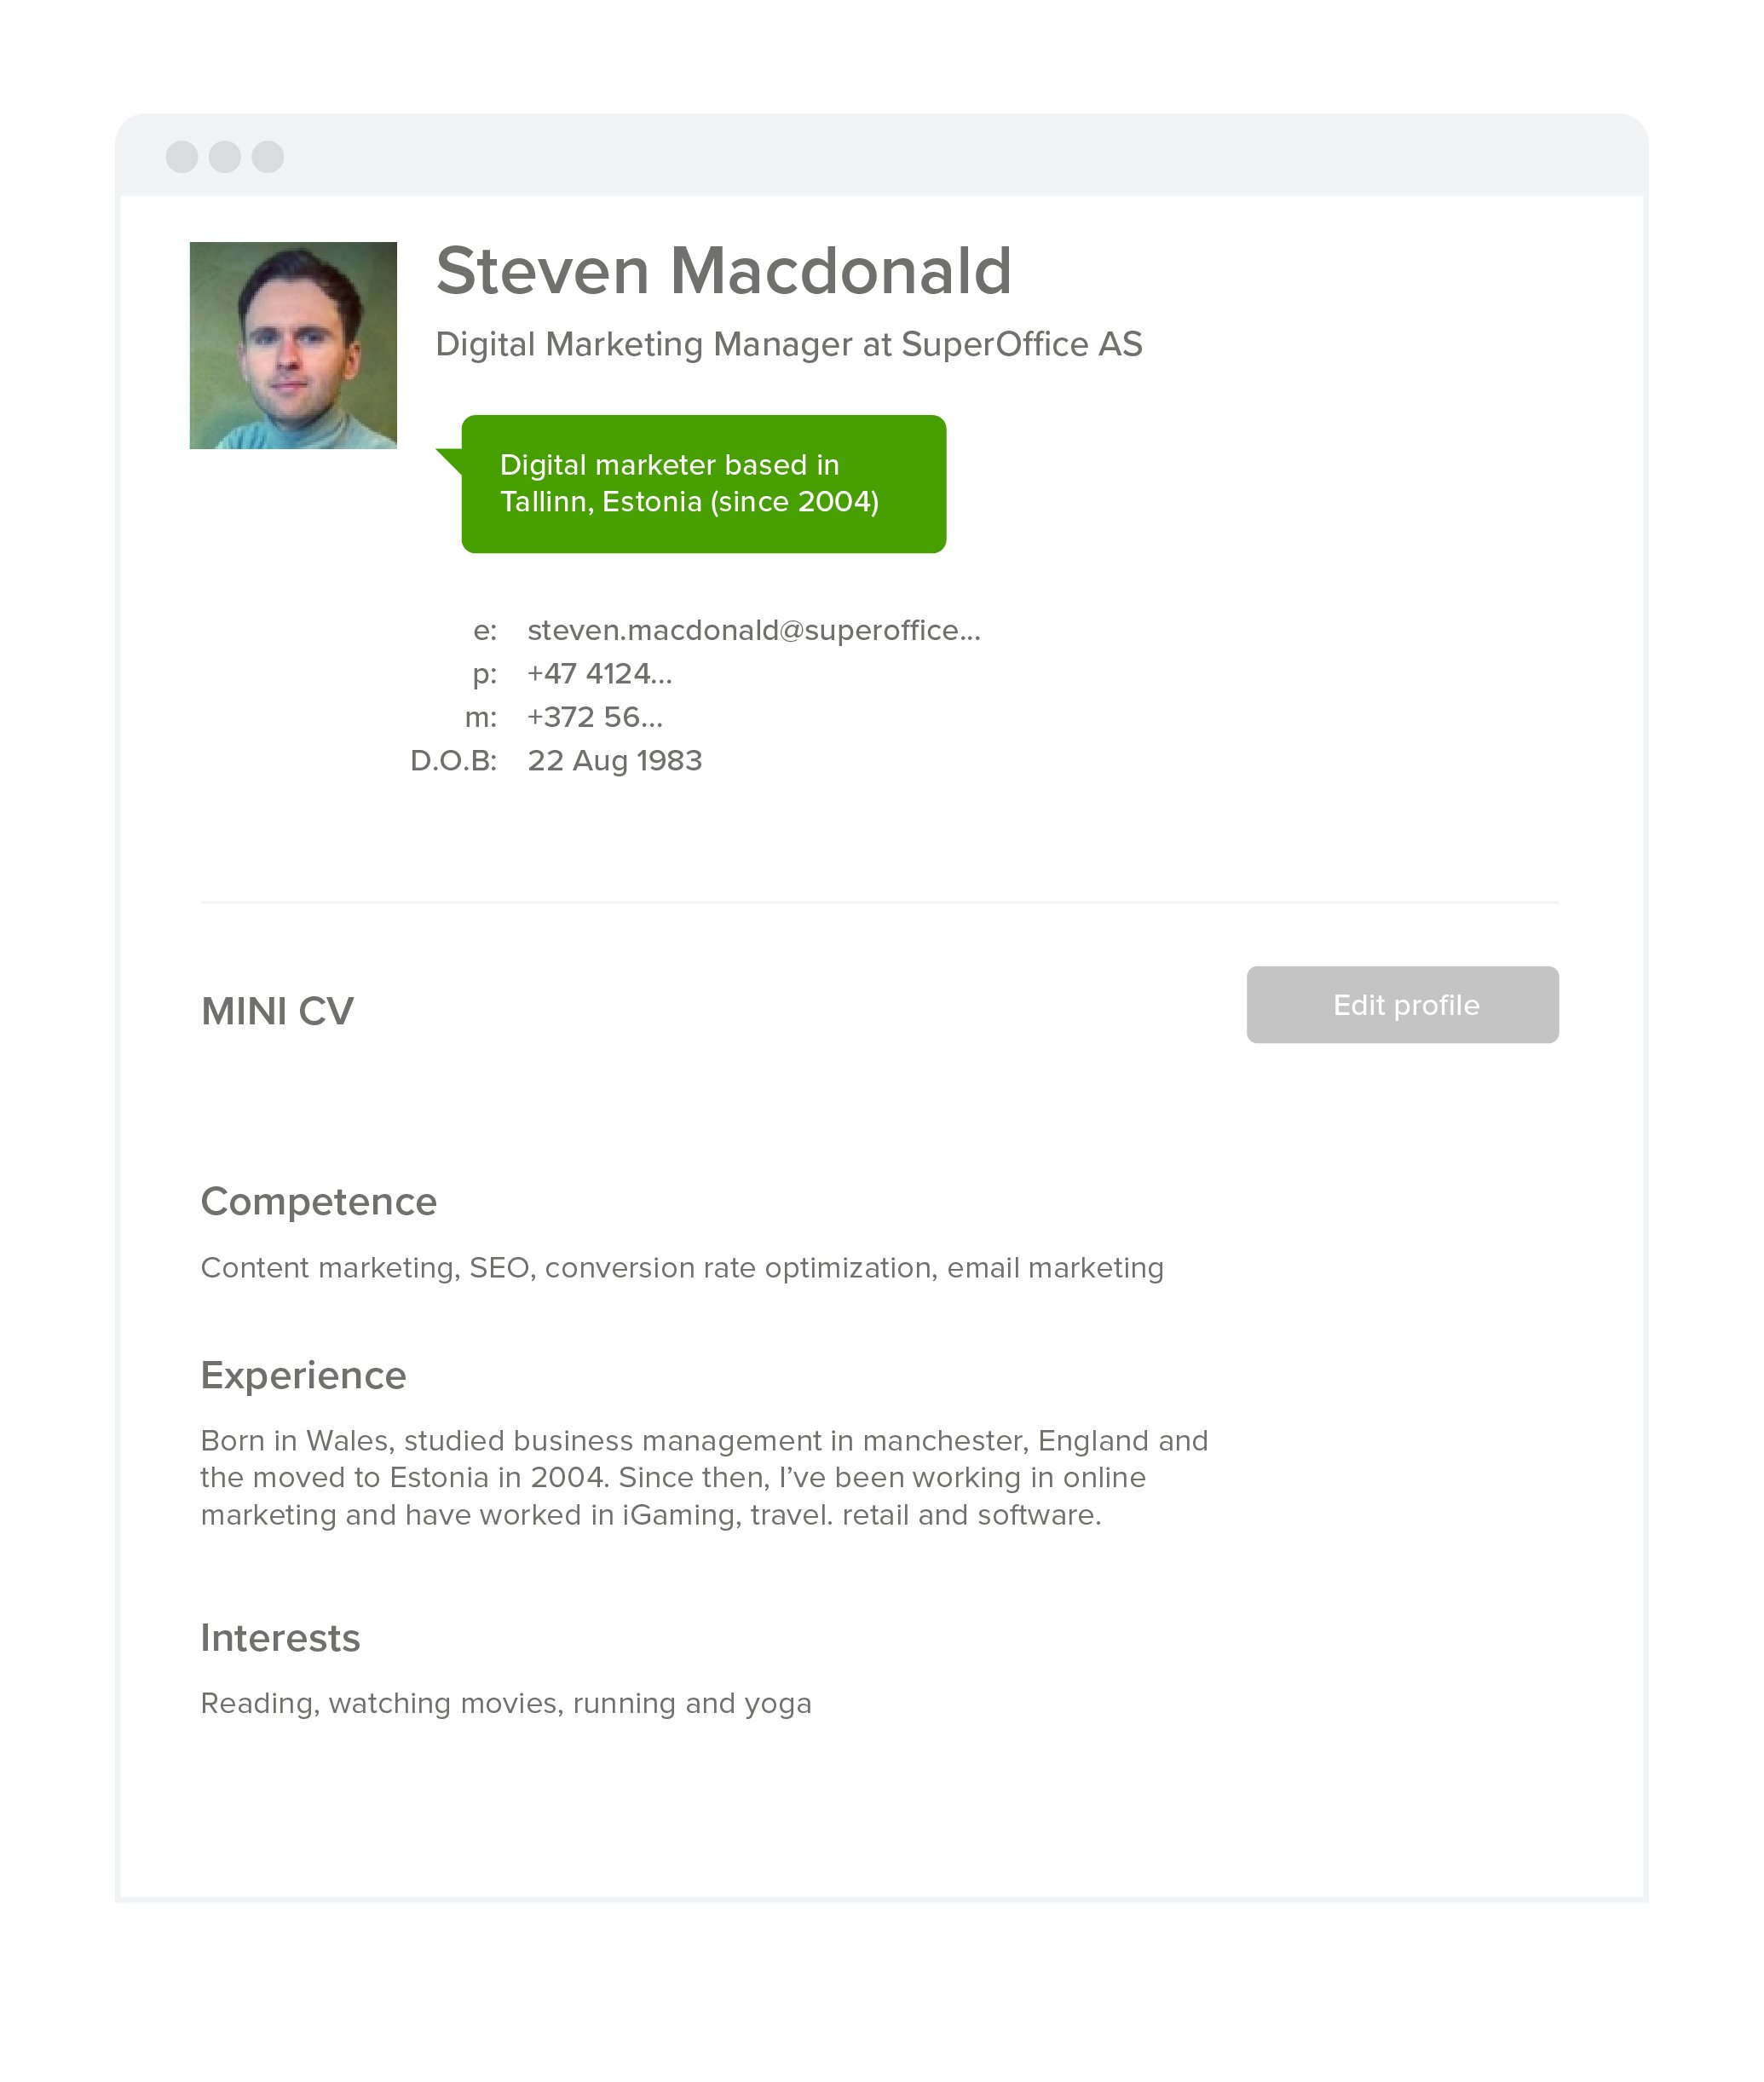 about me profile on company intranet